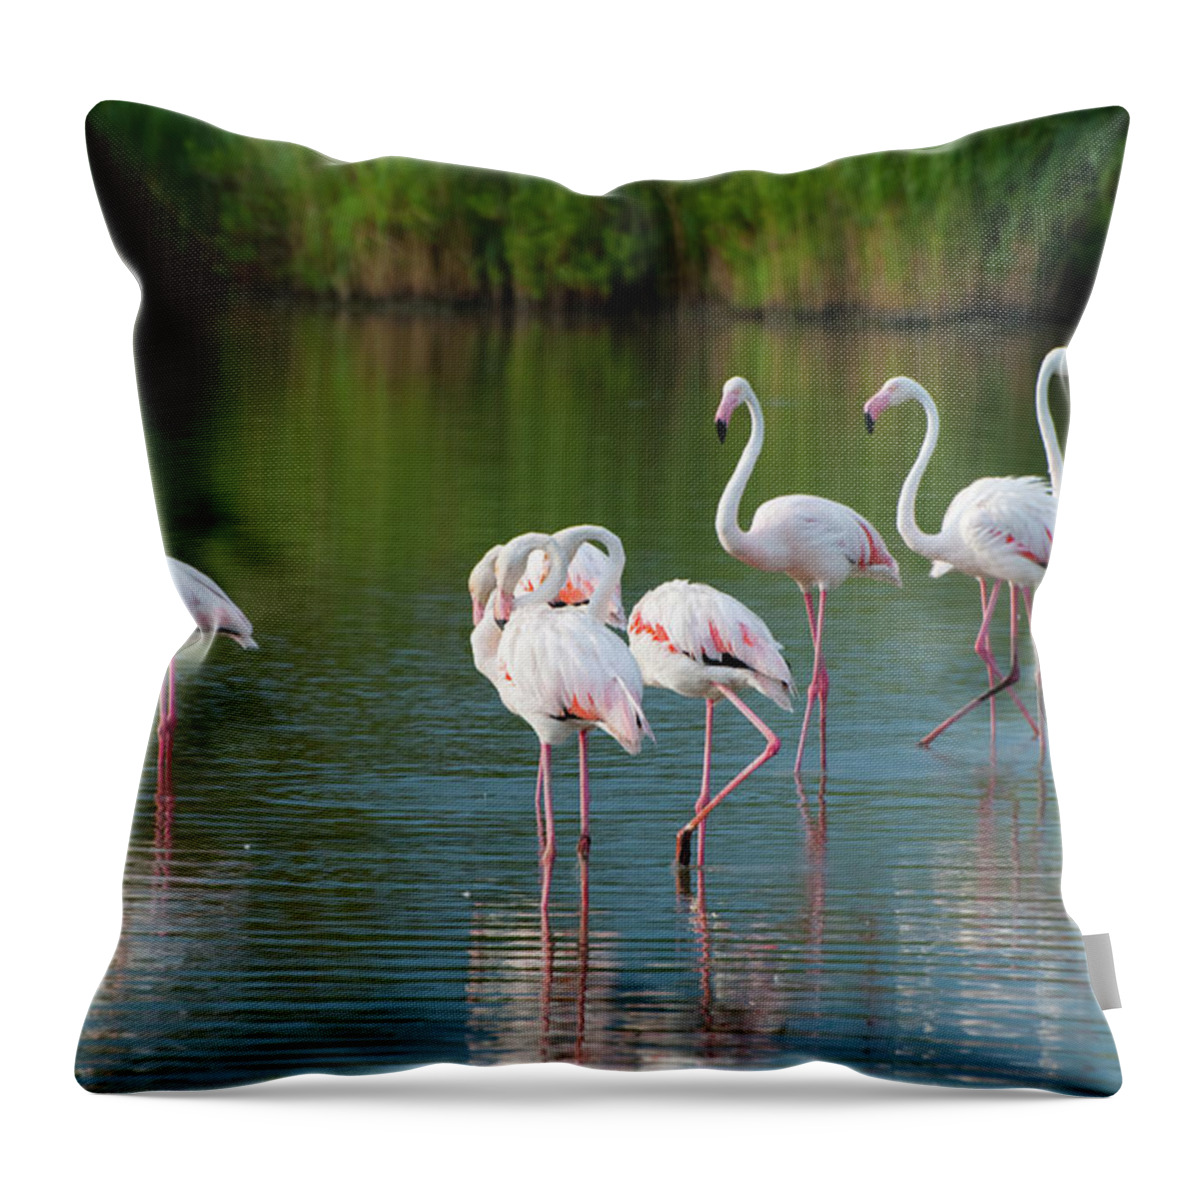 Scenics Throw Pillow featuring the photograph Flamingos by Mmac72